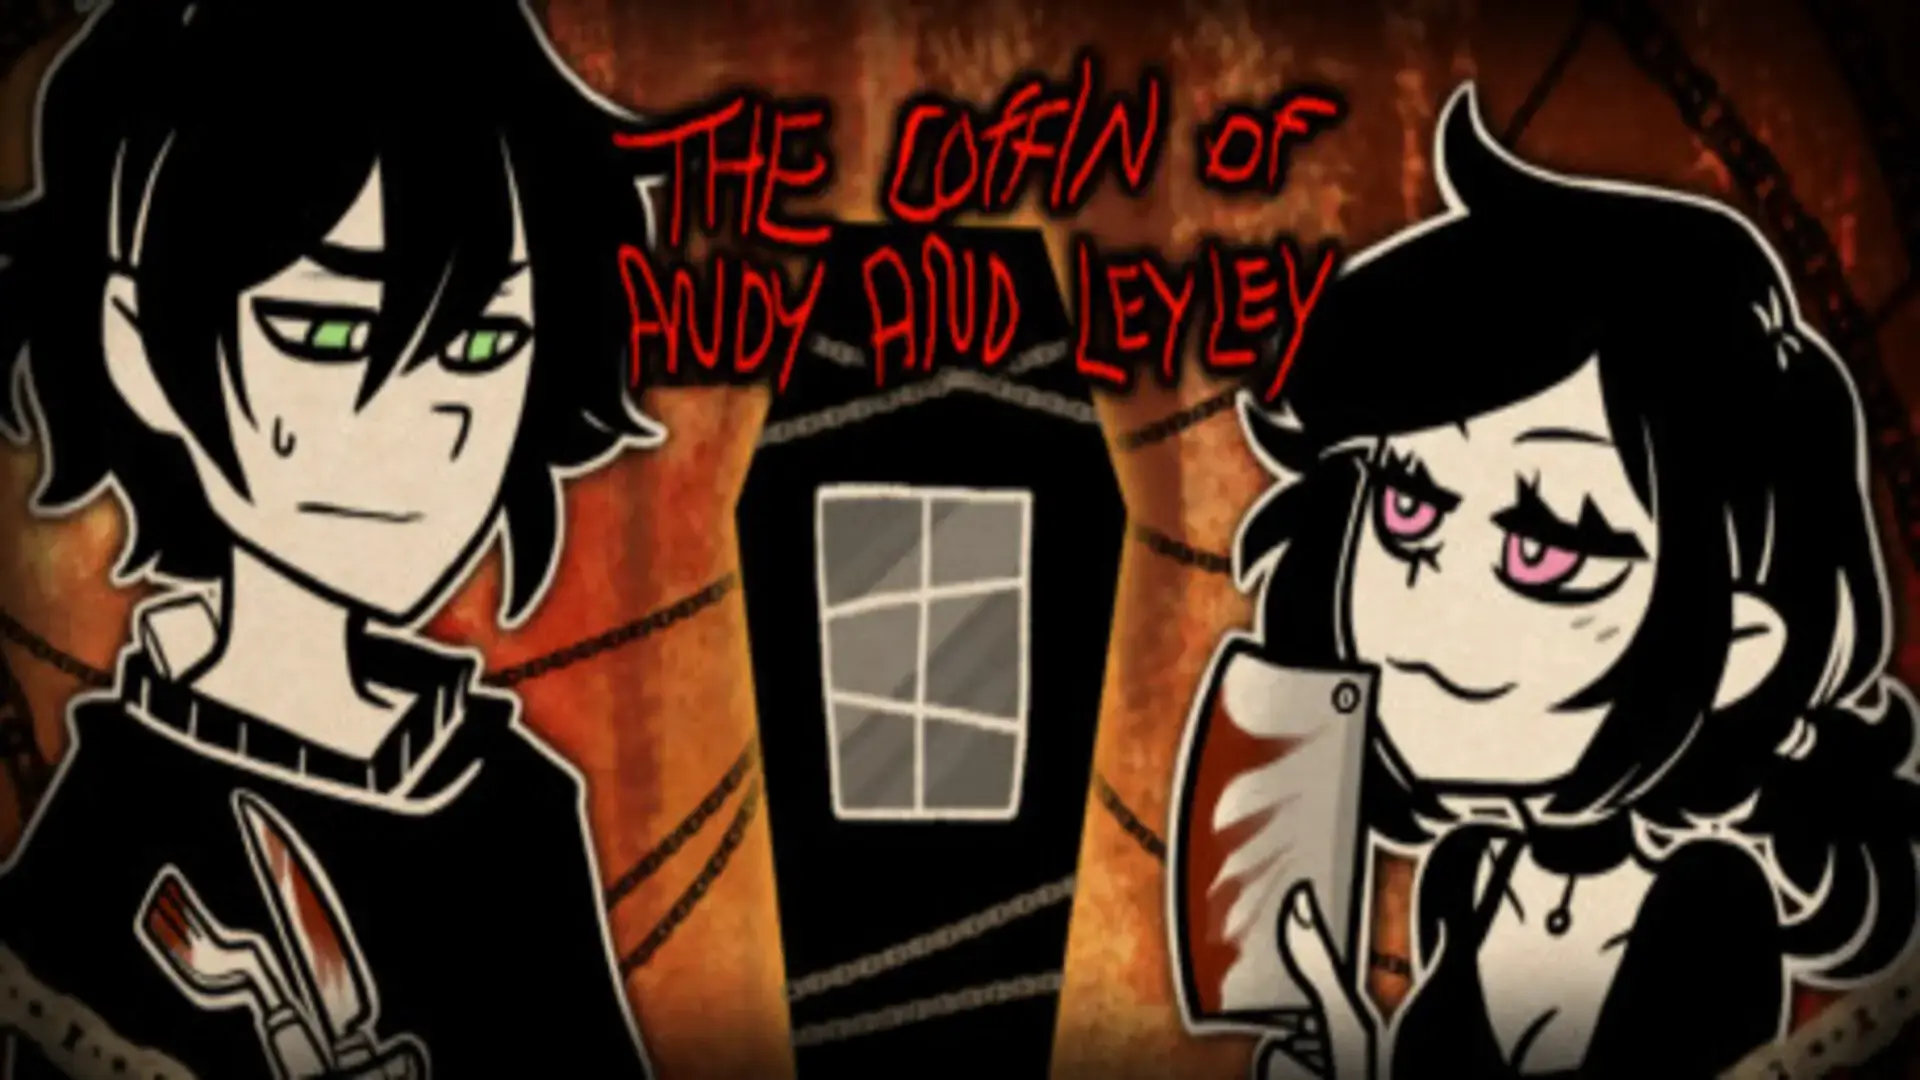 The Coffin of Andy and Leyley – Free Download (v2.0.9)